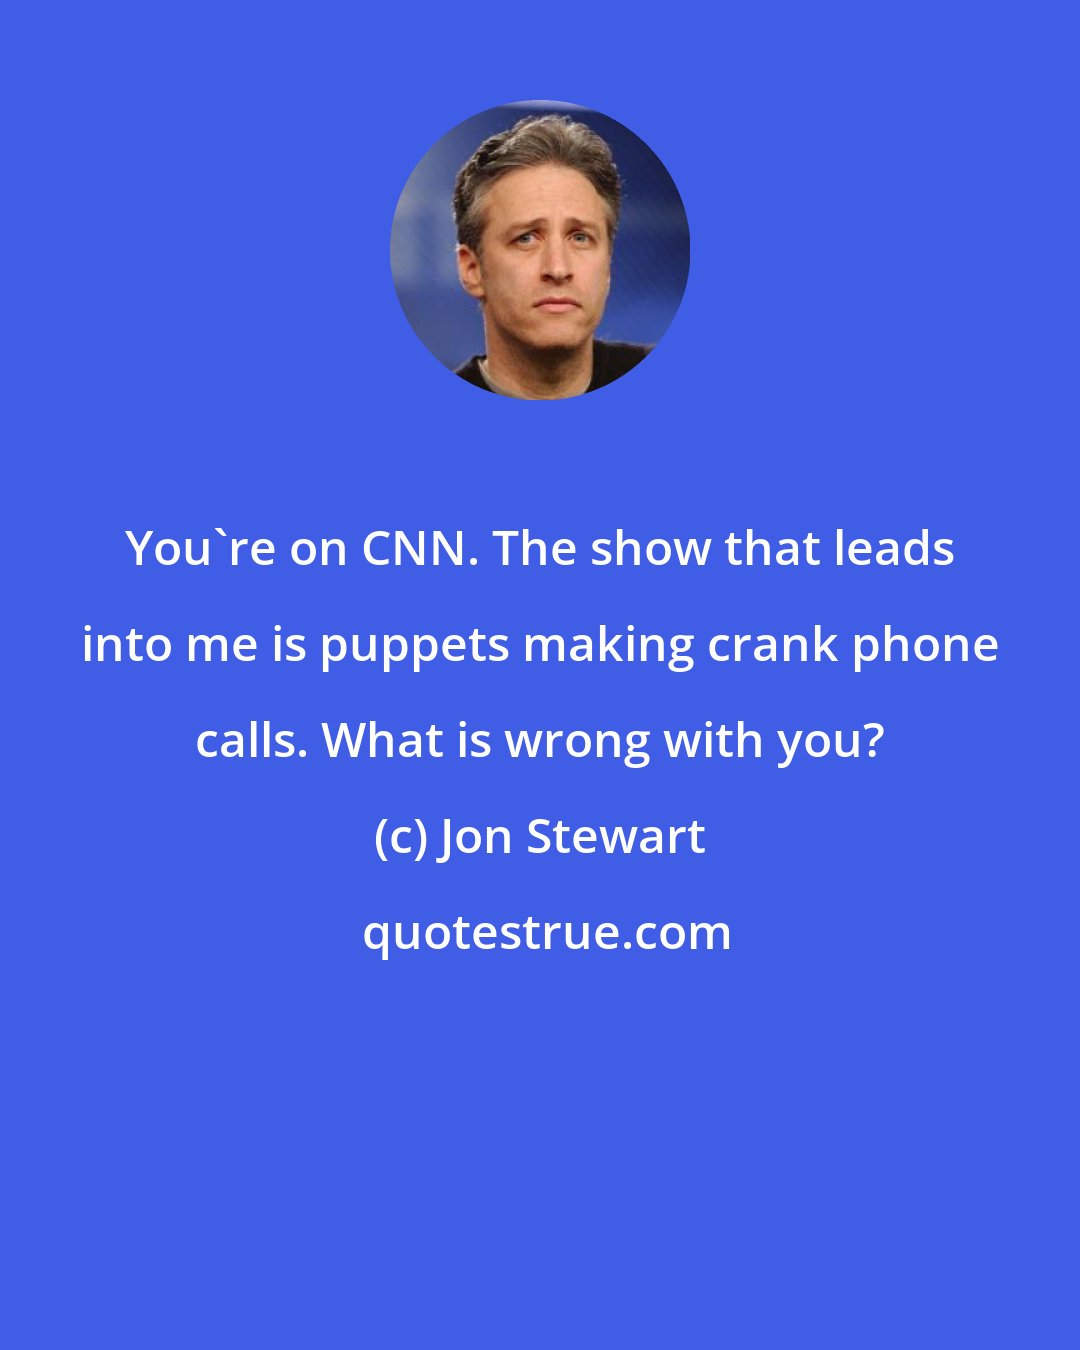 Jon Stewart: You're on CNN. The show that leads into me is puppets making crank phone calls. What is wrong with you?